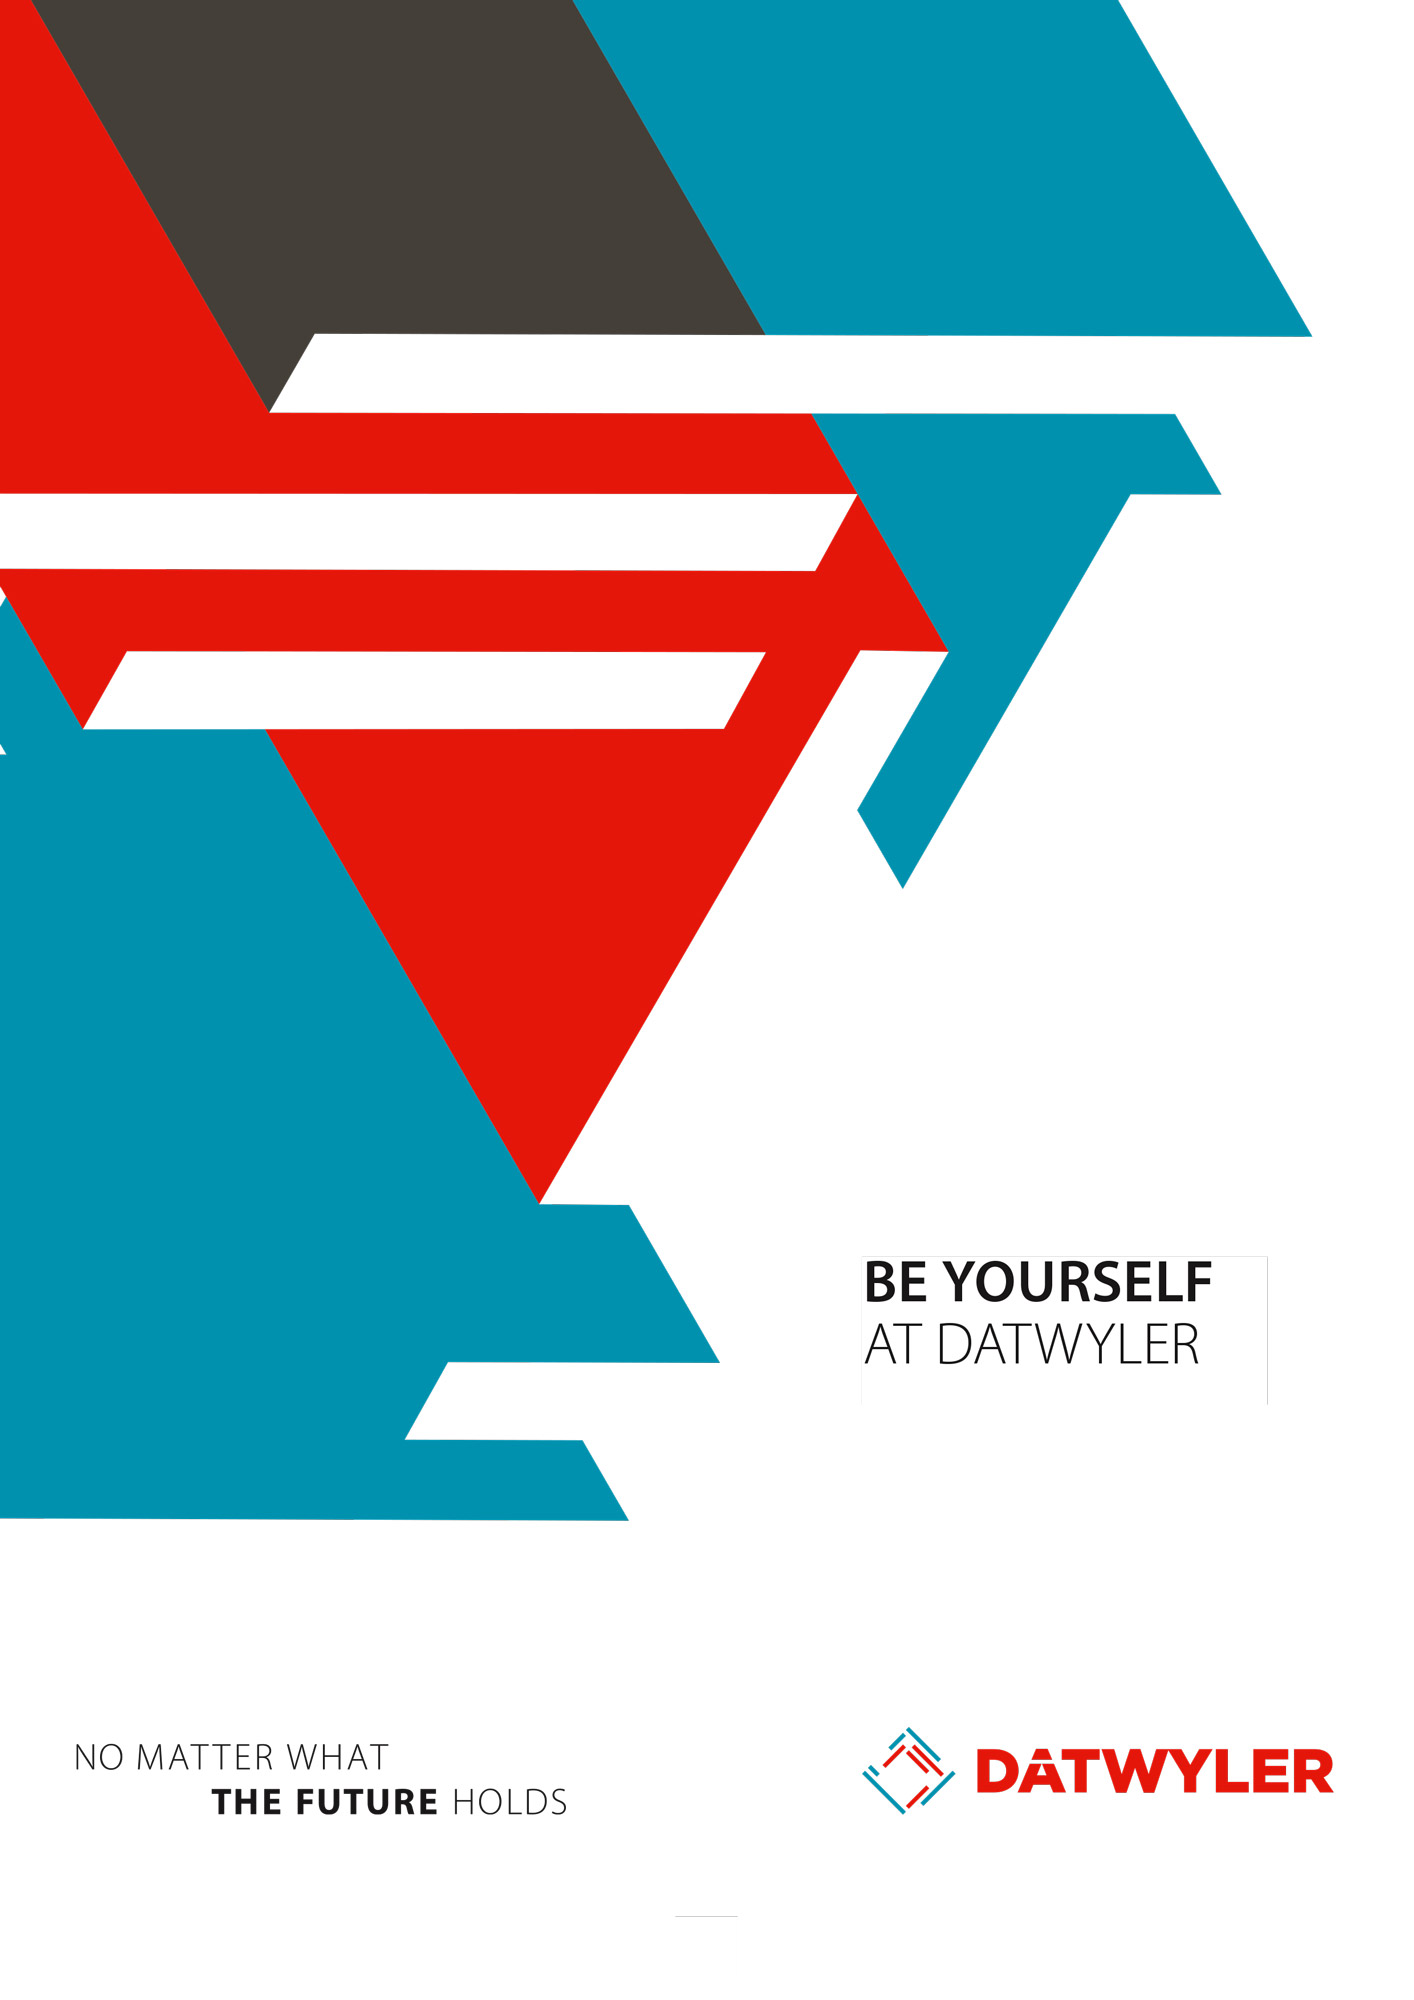 Be yourself at Datwyler